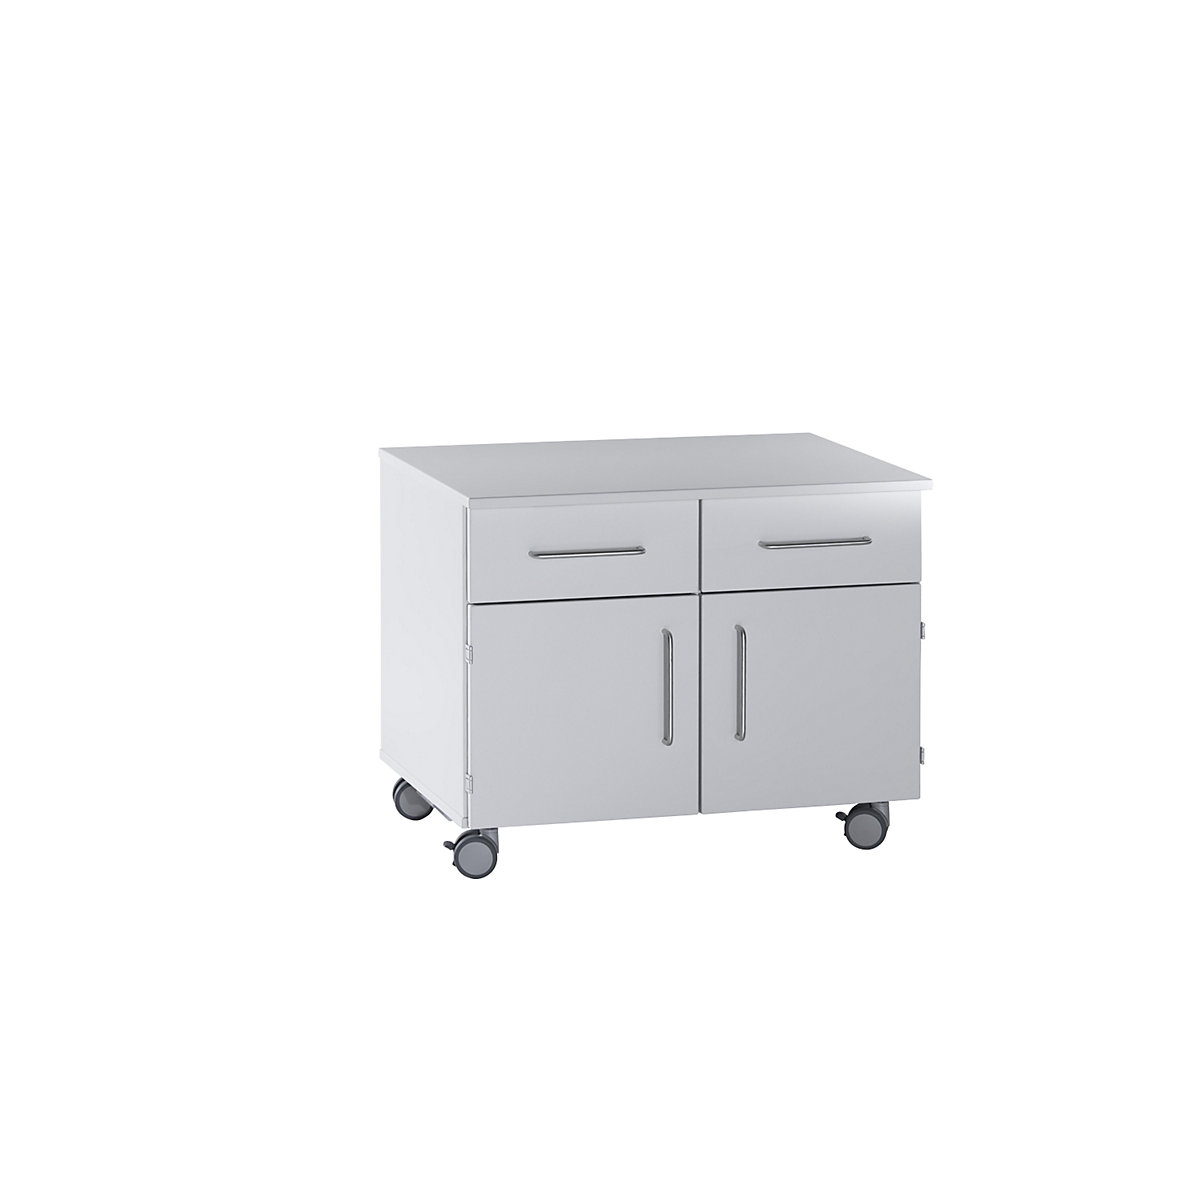 Laboratory base cupboard, low, 2 drawers, 2 doors, 2 shelves, 1 central partition, width 836 mm-1